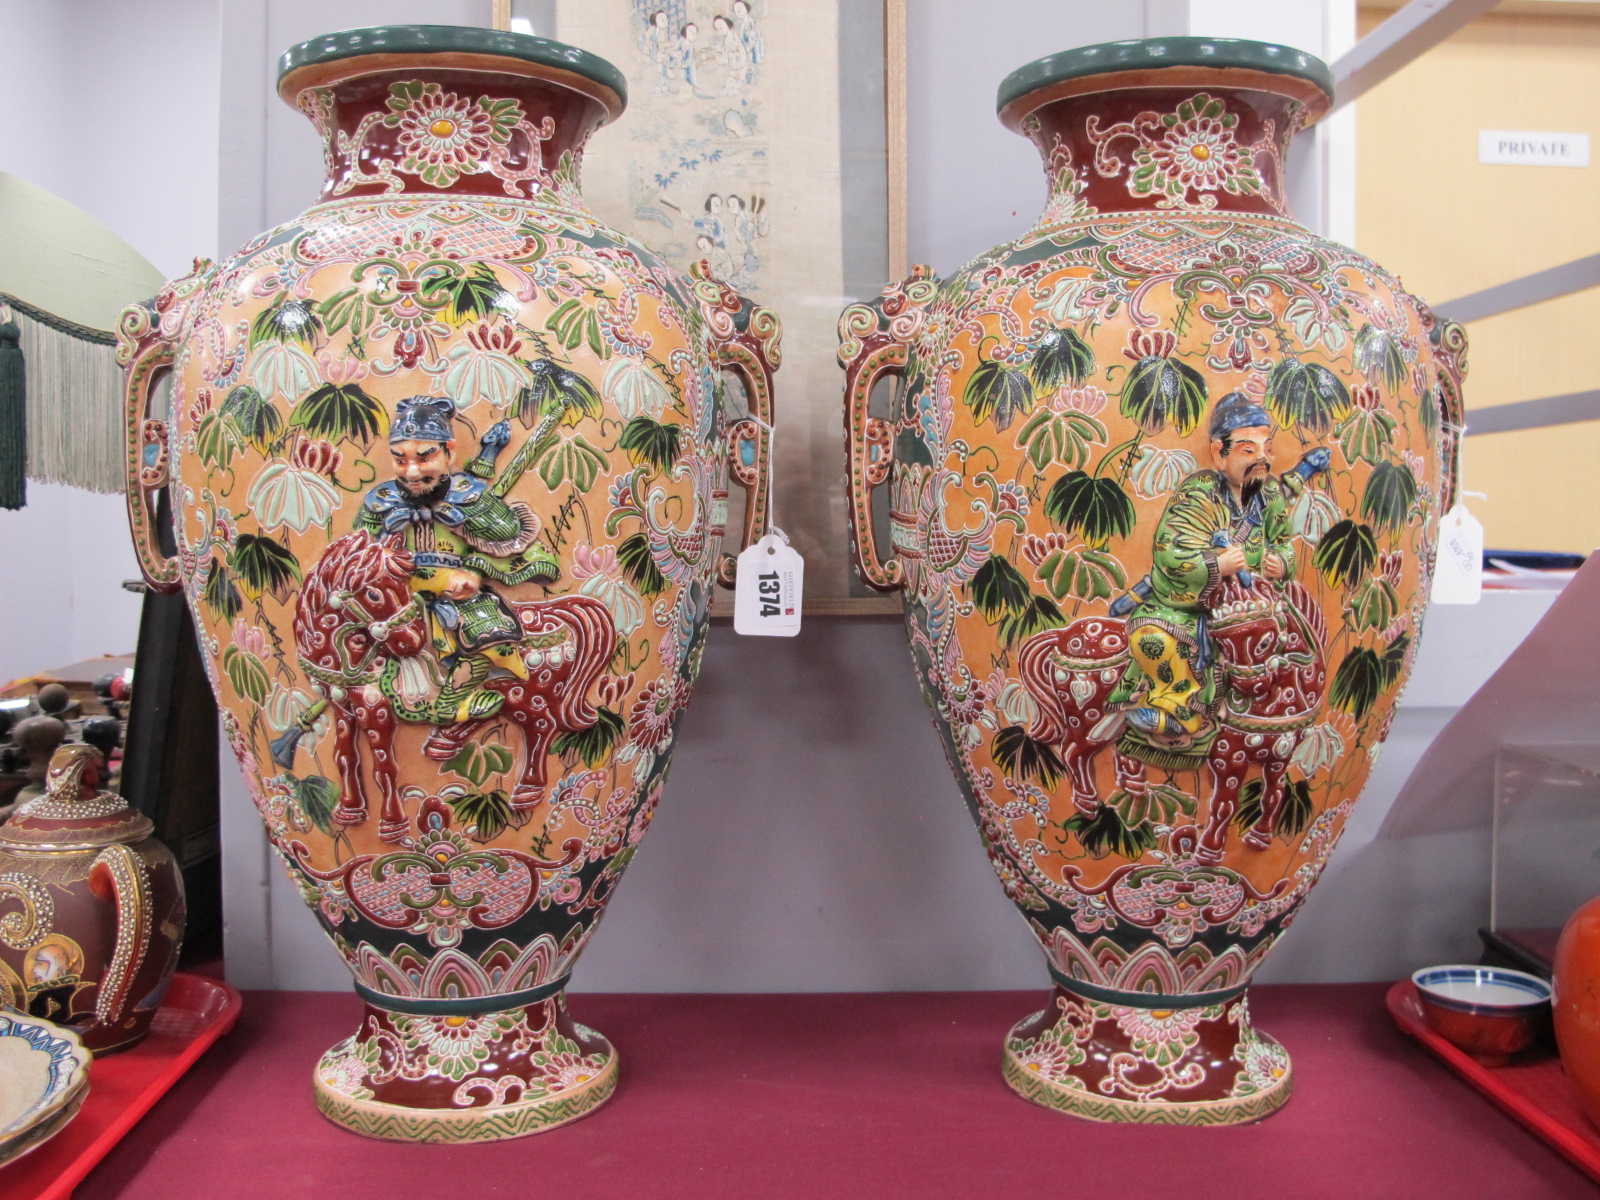 A Pair of Oriental Satsuma Vases, each with Chrysanthemum and scroll decoration, with Samurai